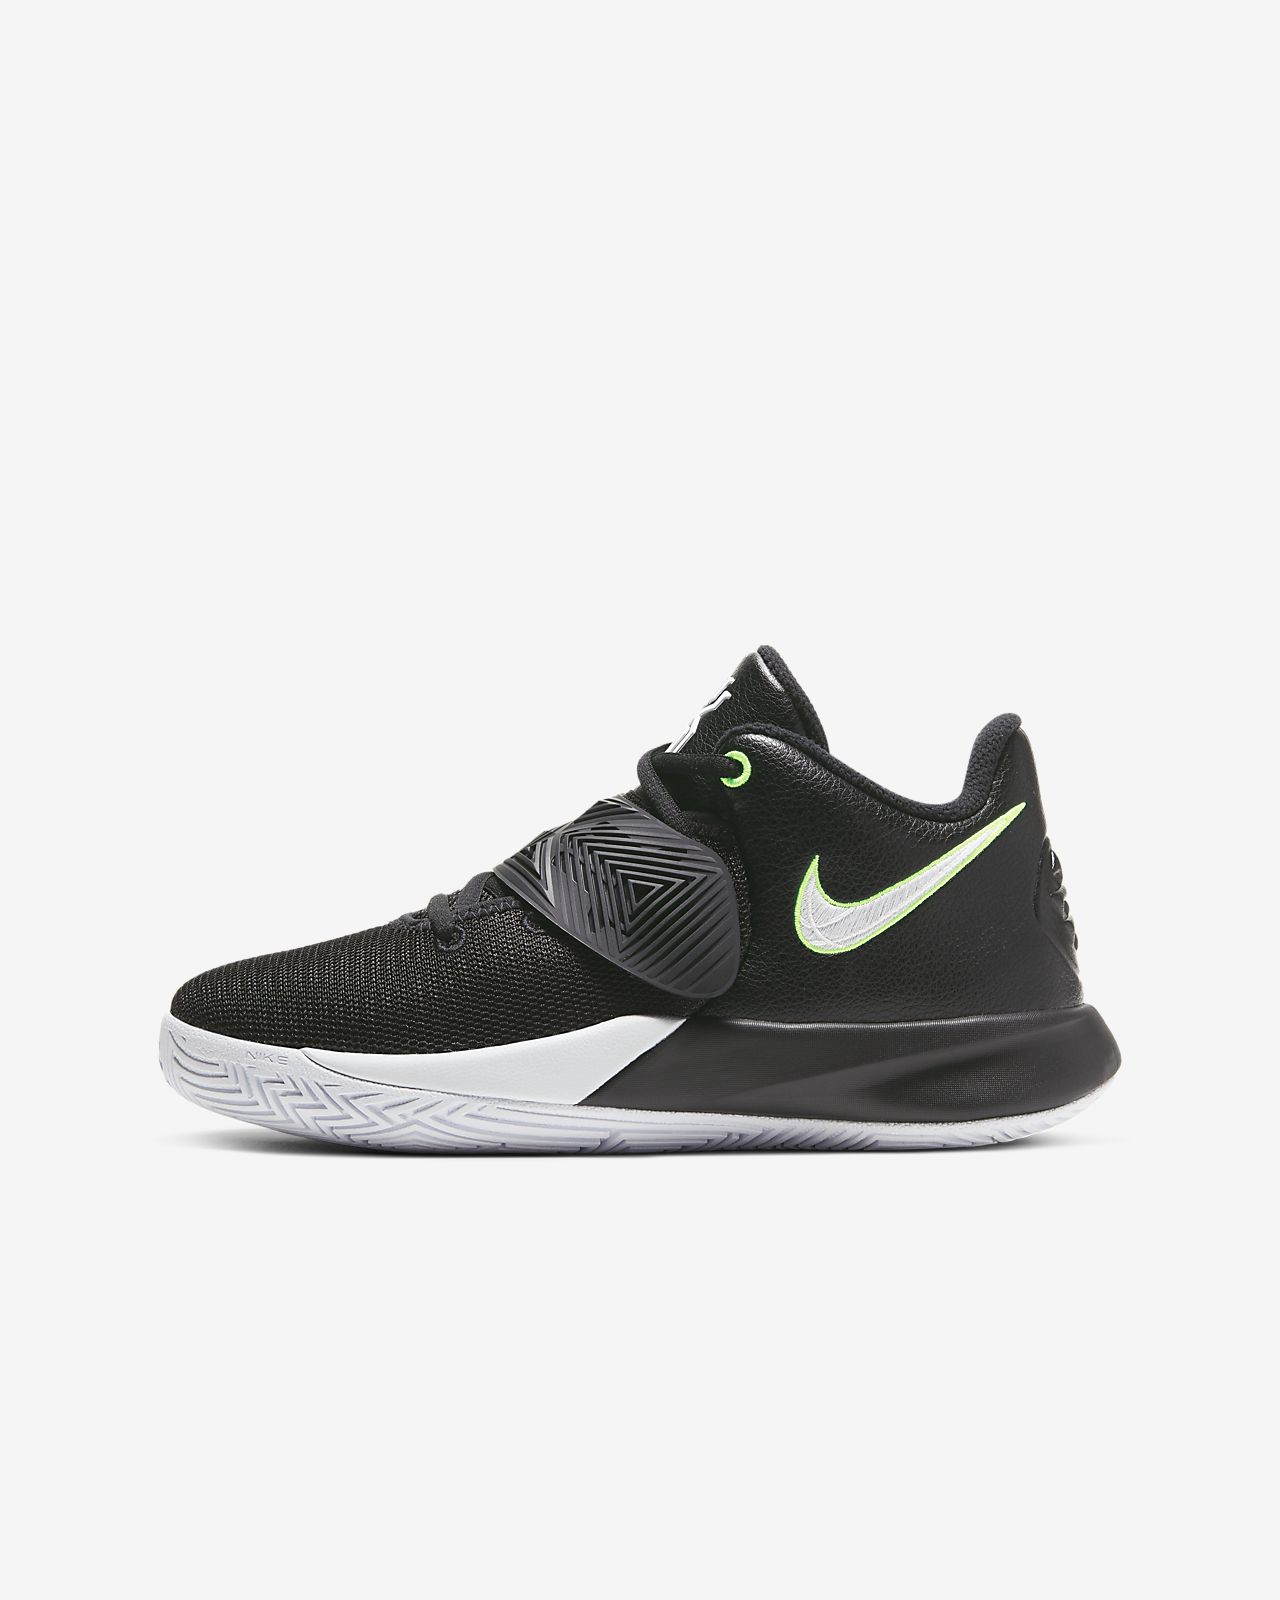 kyrie flytrap white youth